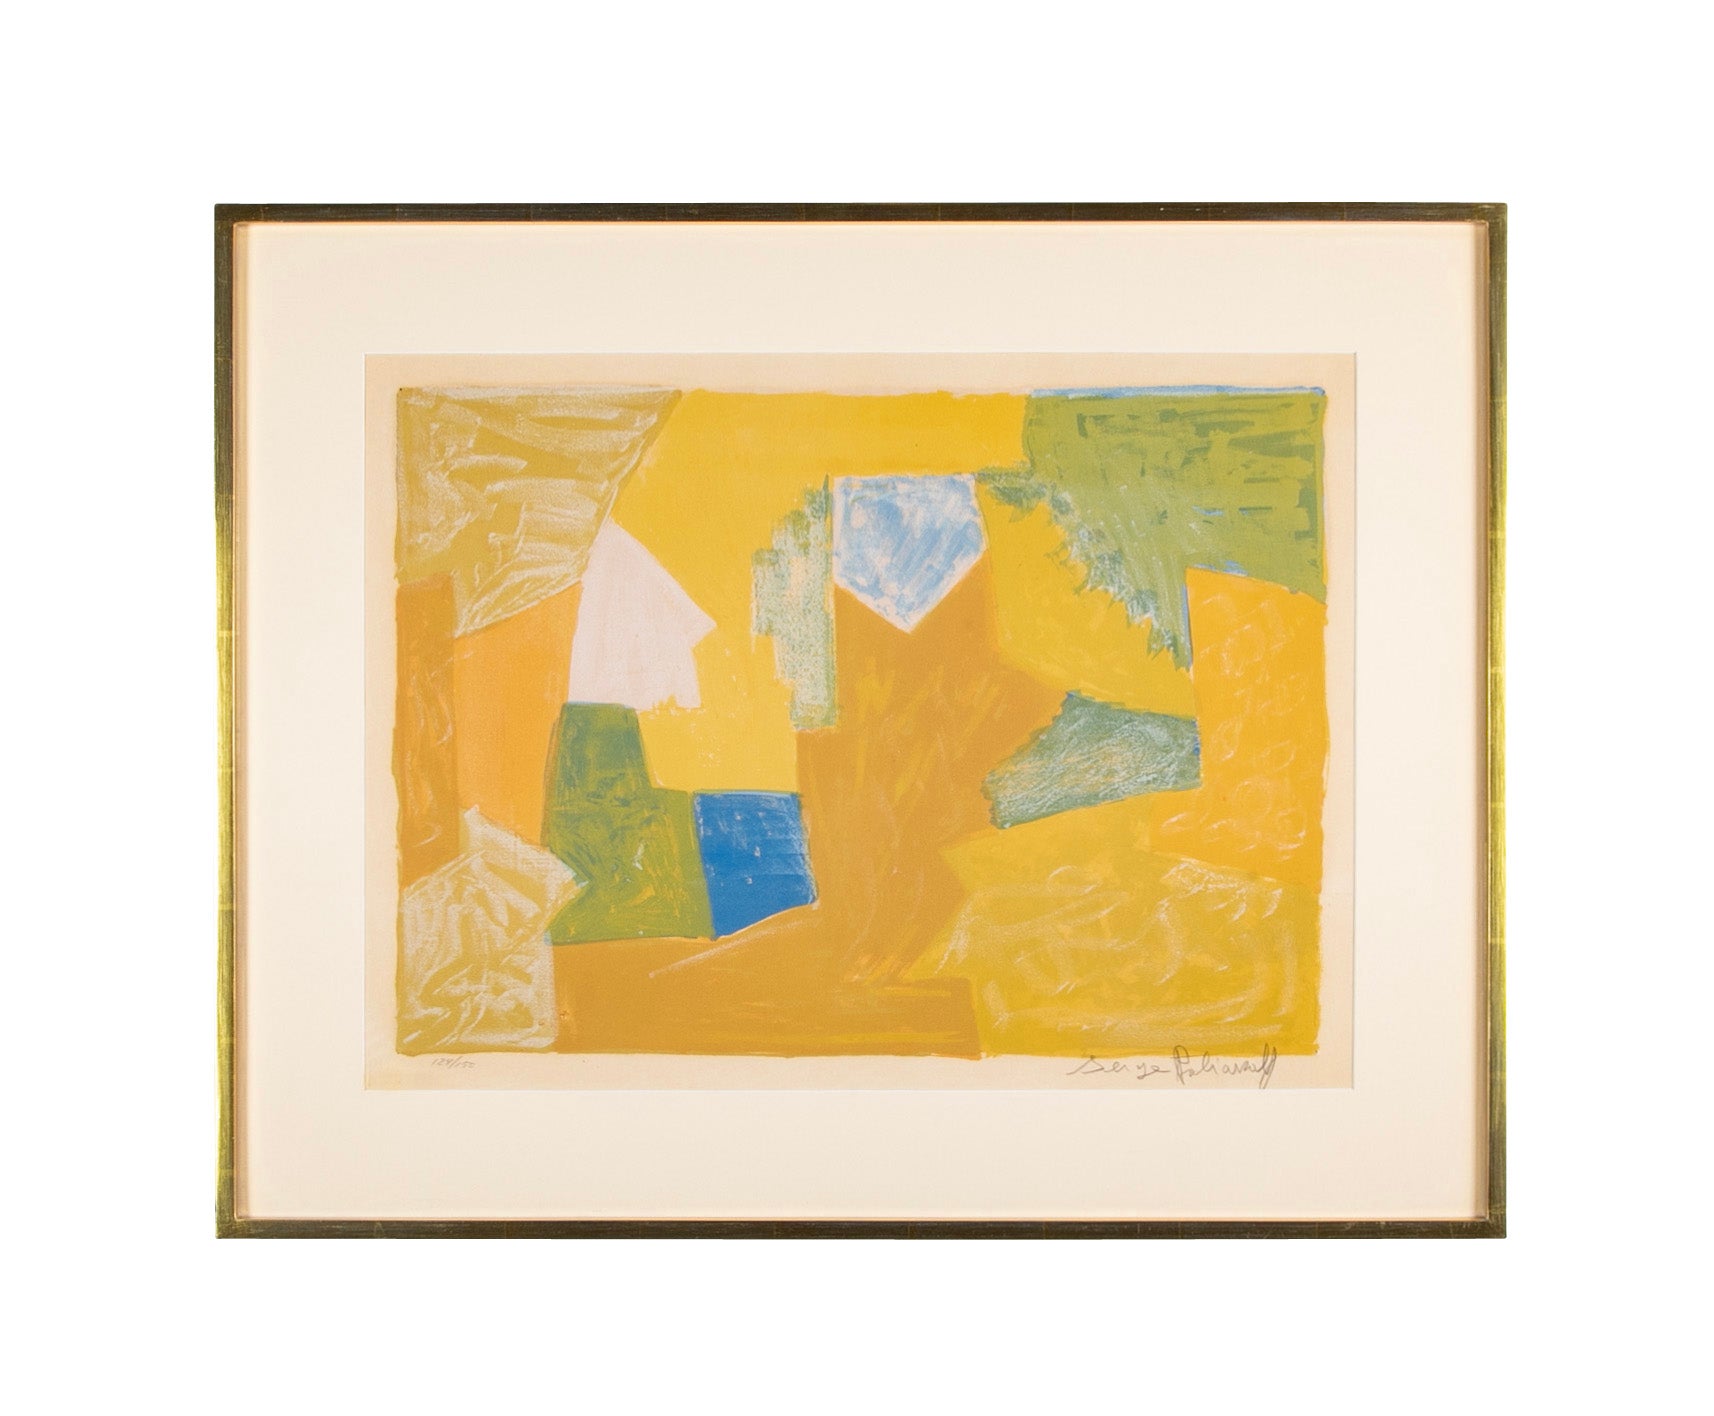 20th Century Lithograph by Serge Poliakoff